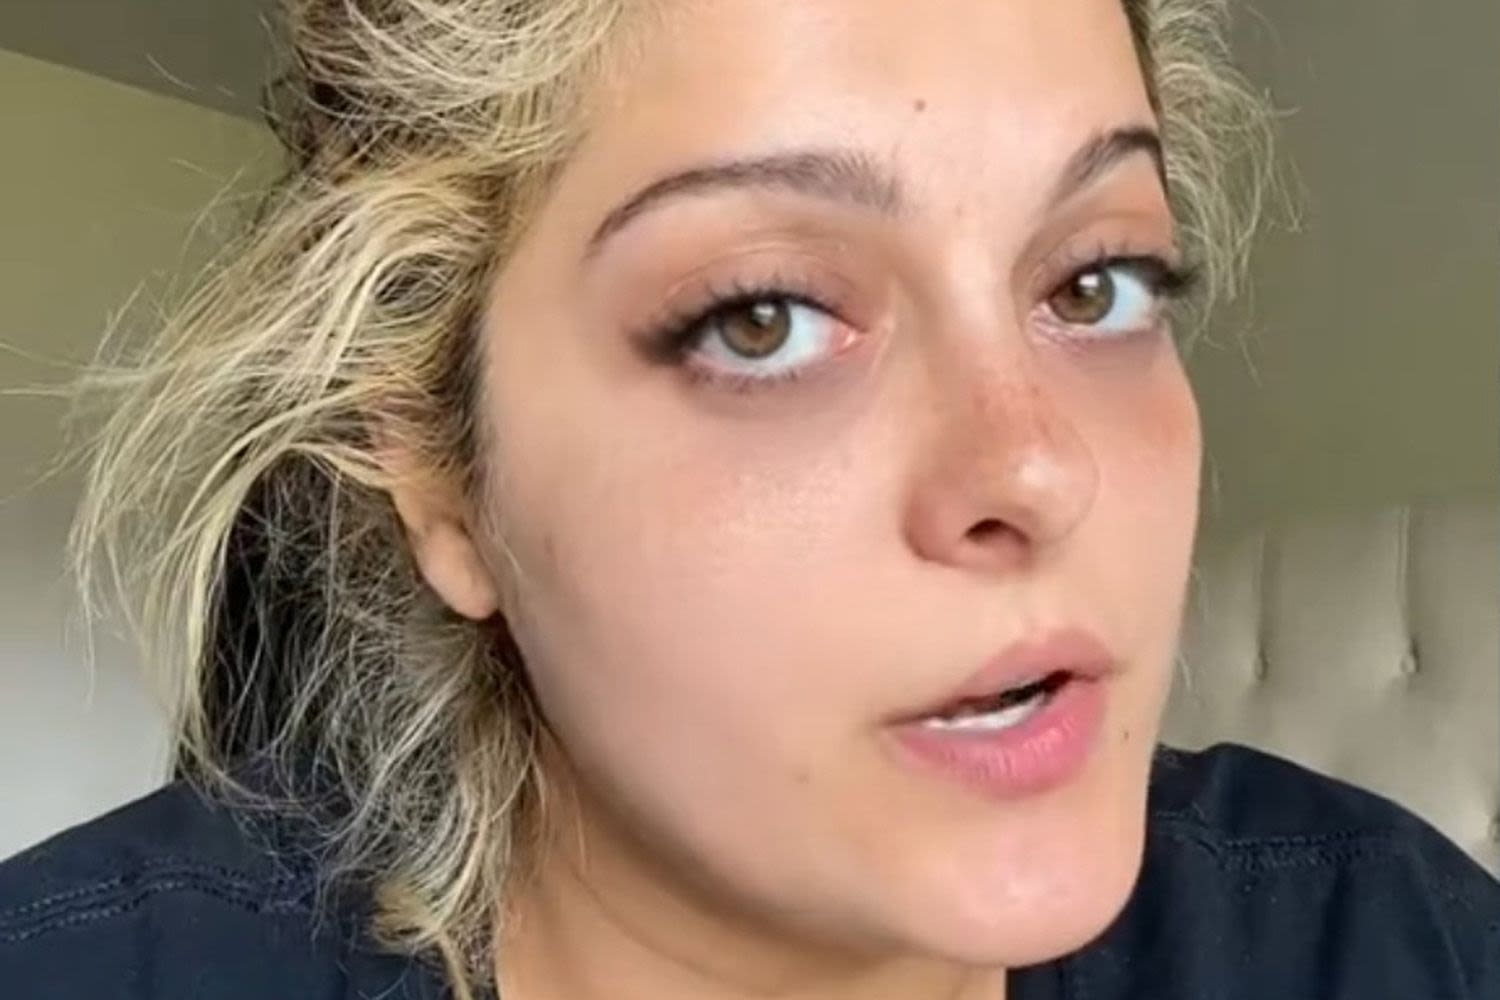 Bebe Rexha Had Her Period for 20 Days in One Month Due to PCOS, Plus a Burst Cyst: 'So Much Pain'